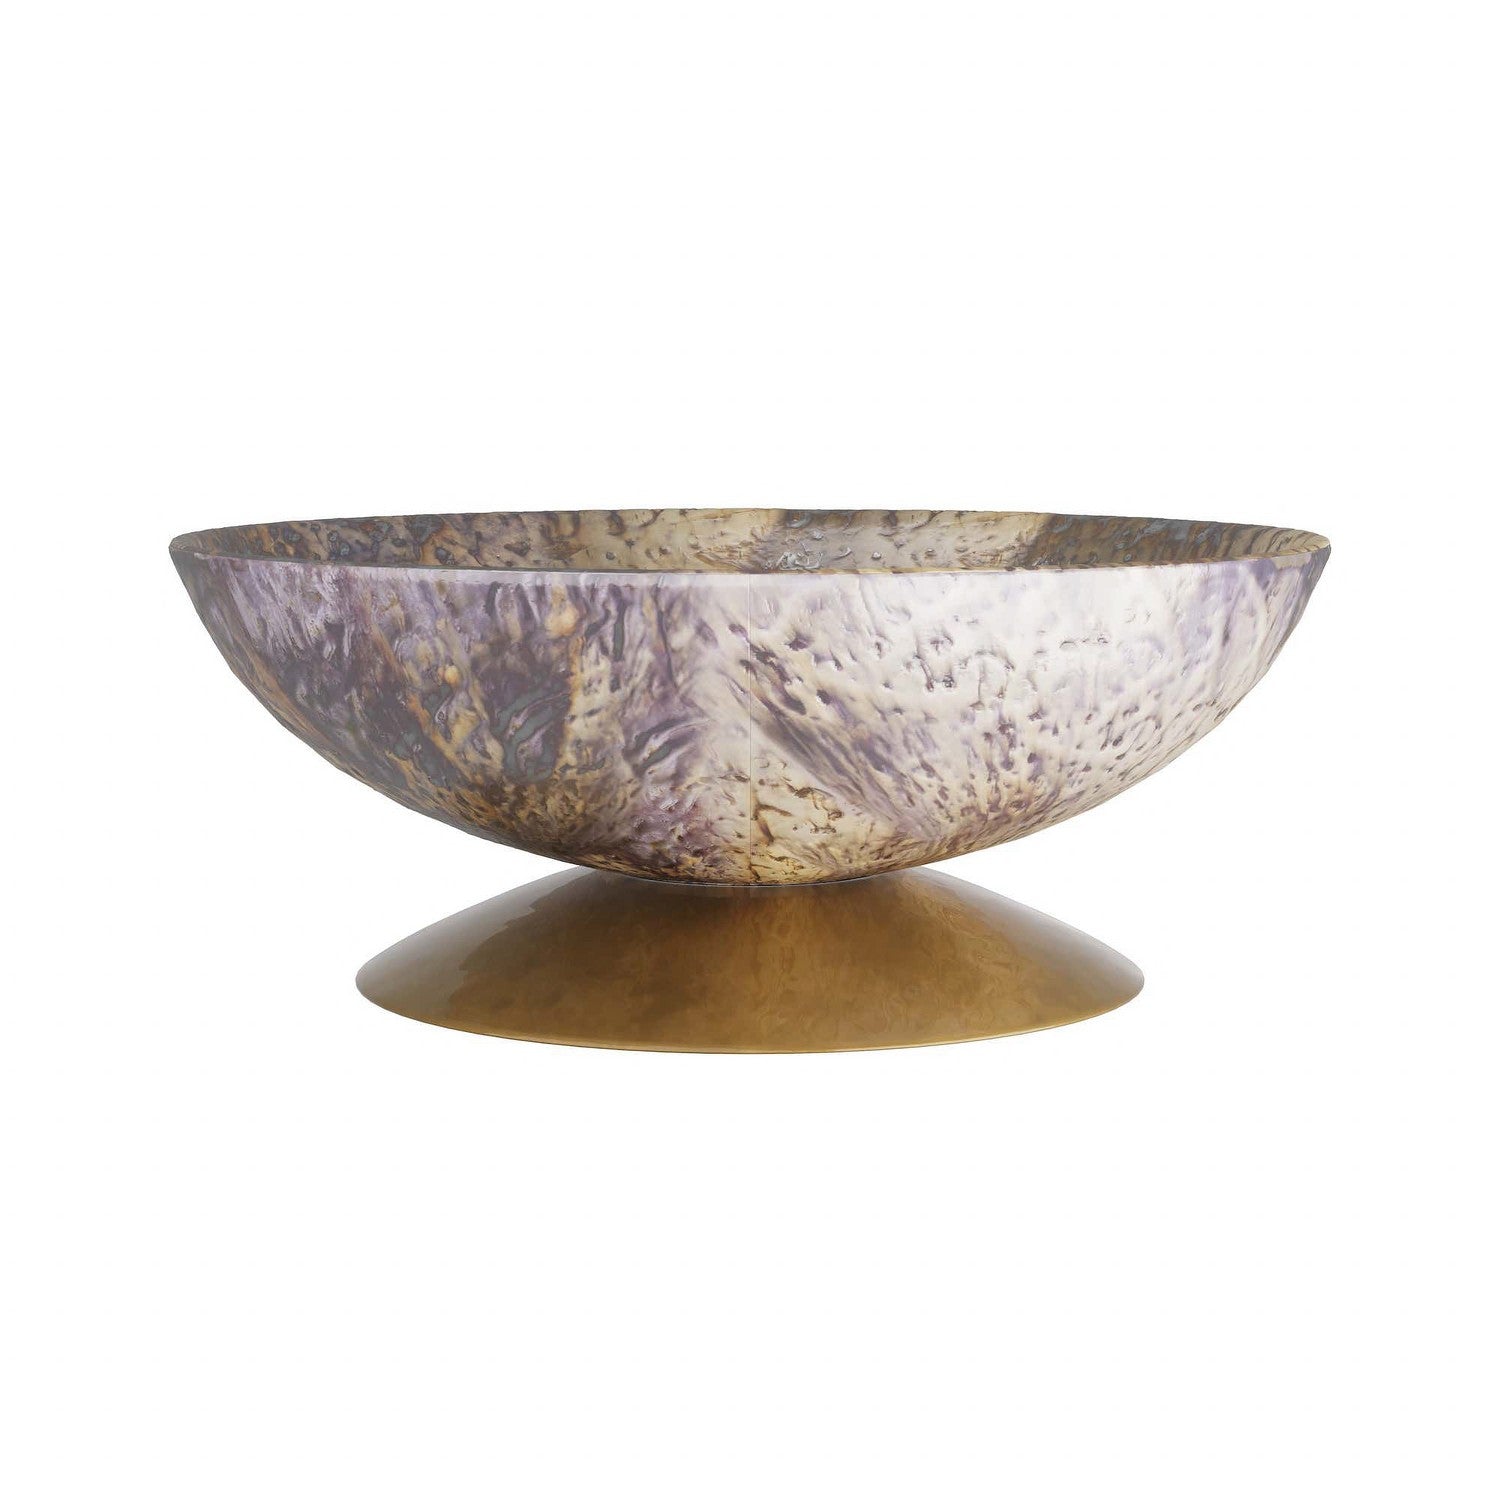 Centerpiece from the Luna collection in Textured Mercury finish